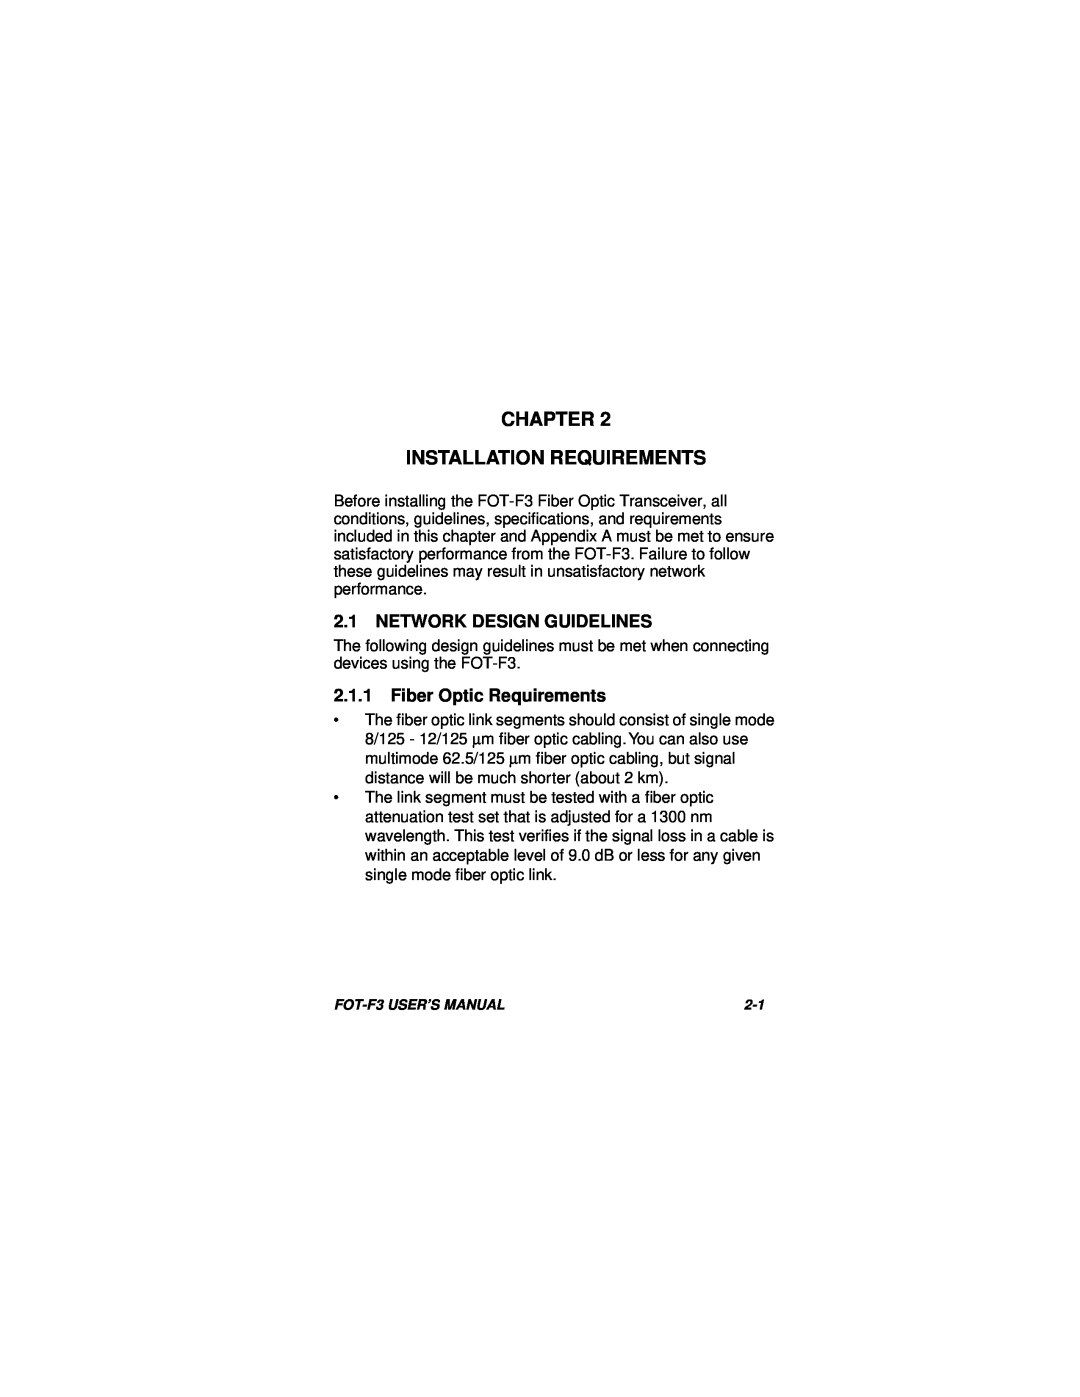 Cabletron Systems F3 user manual Chapter Installation Requirements, Network Design Guidelines, Fiber Optic Requirements 